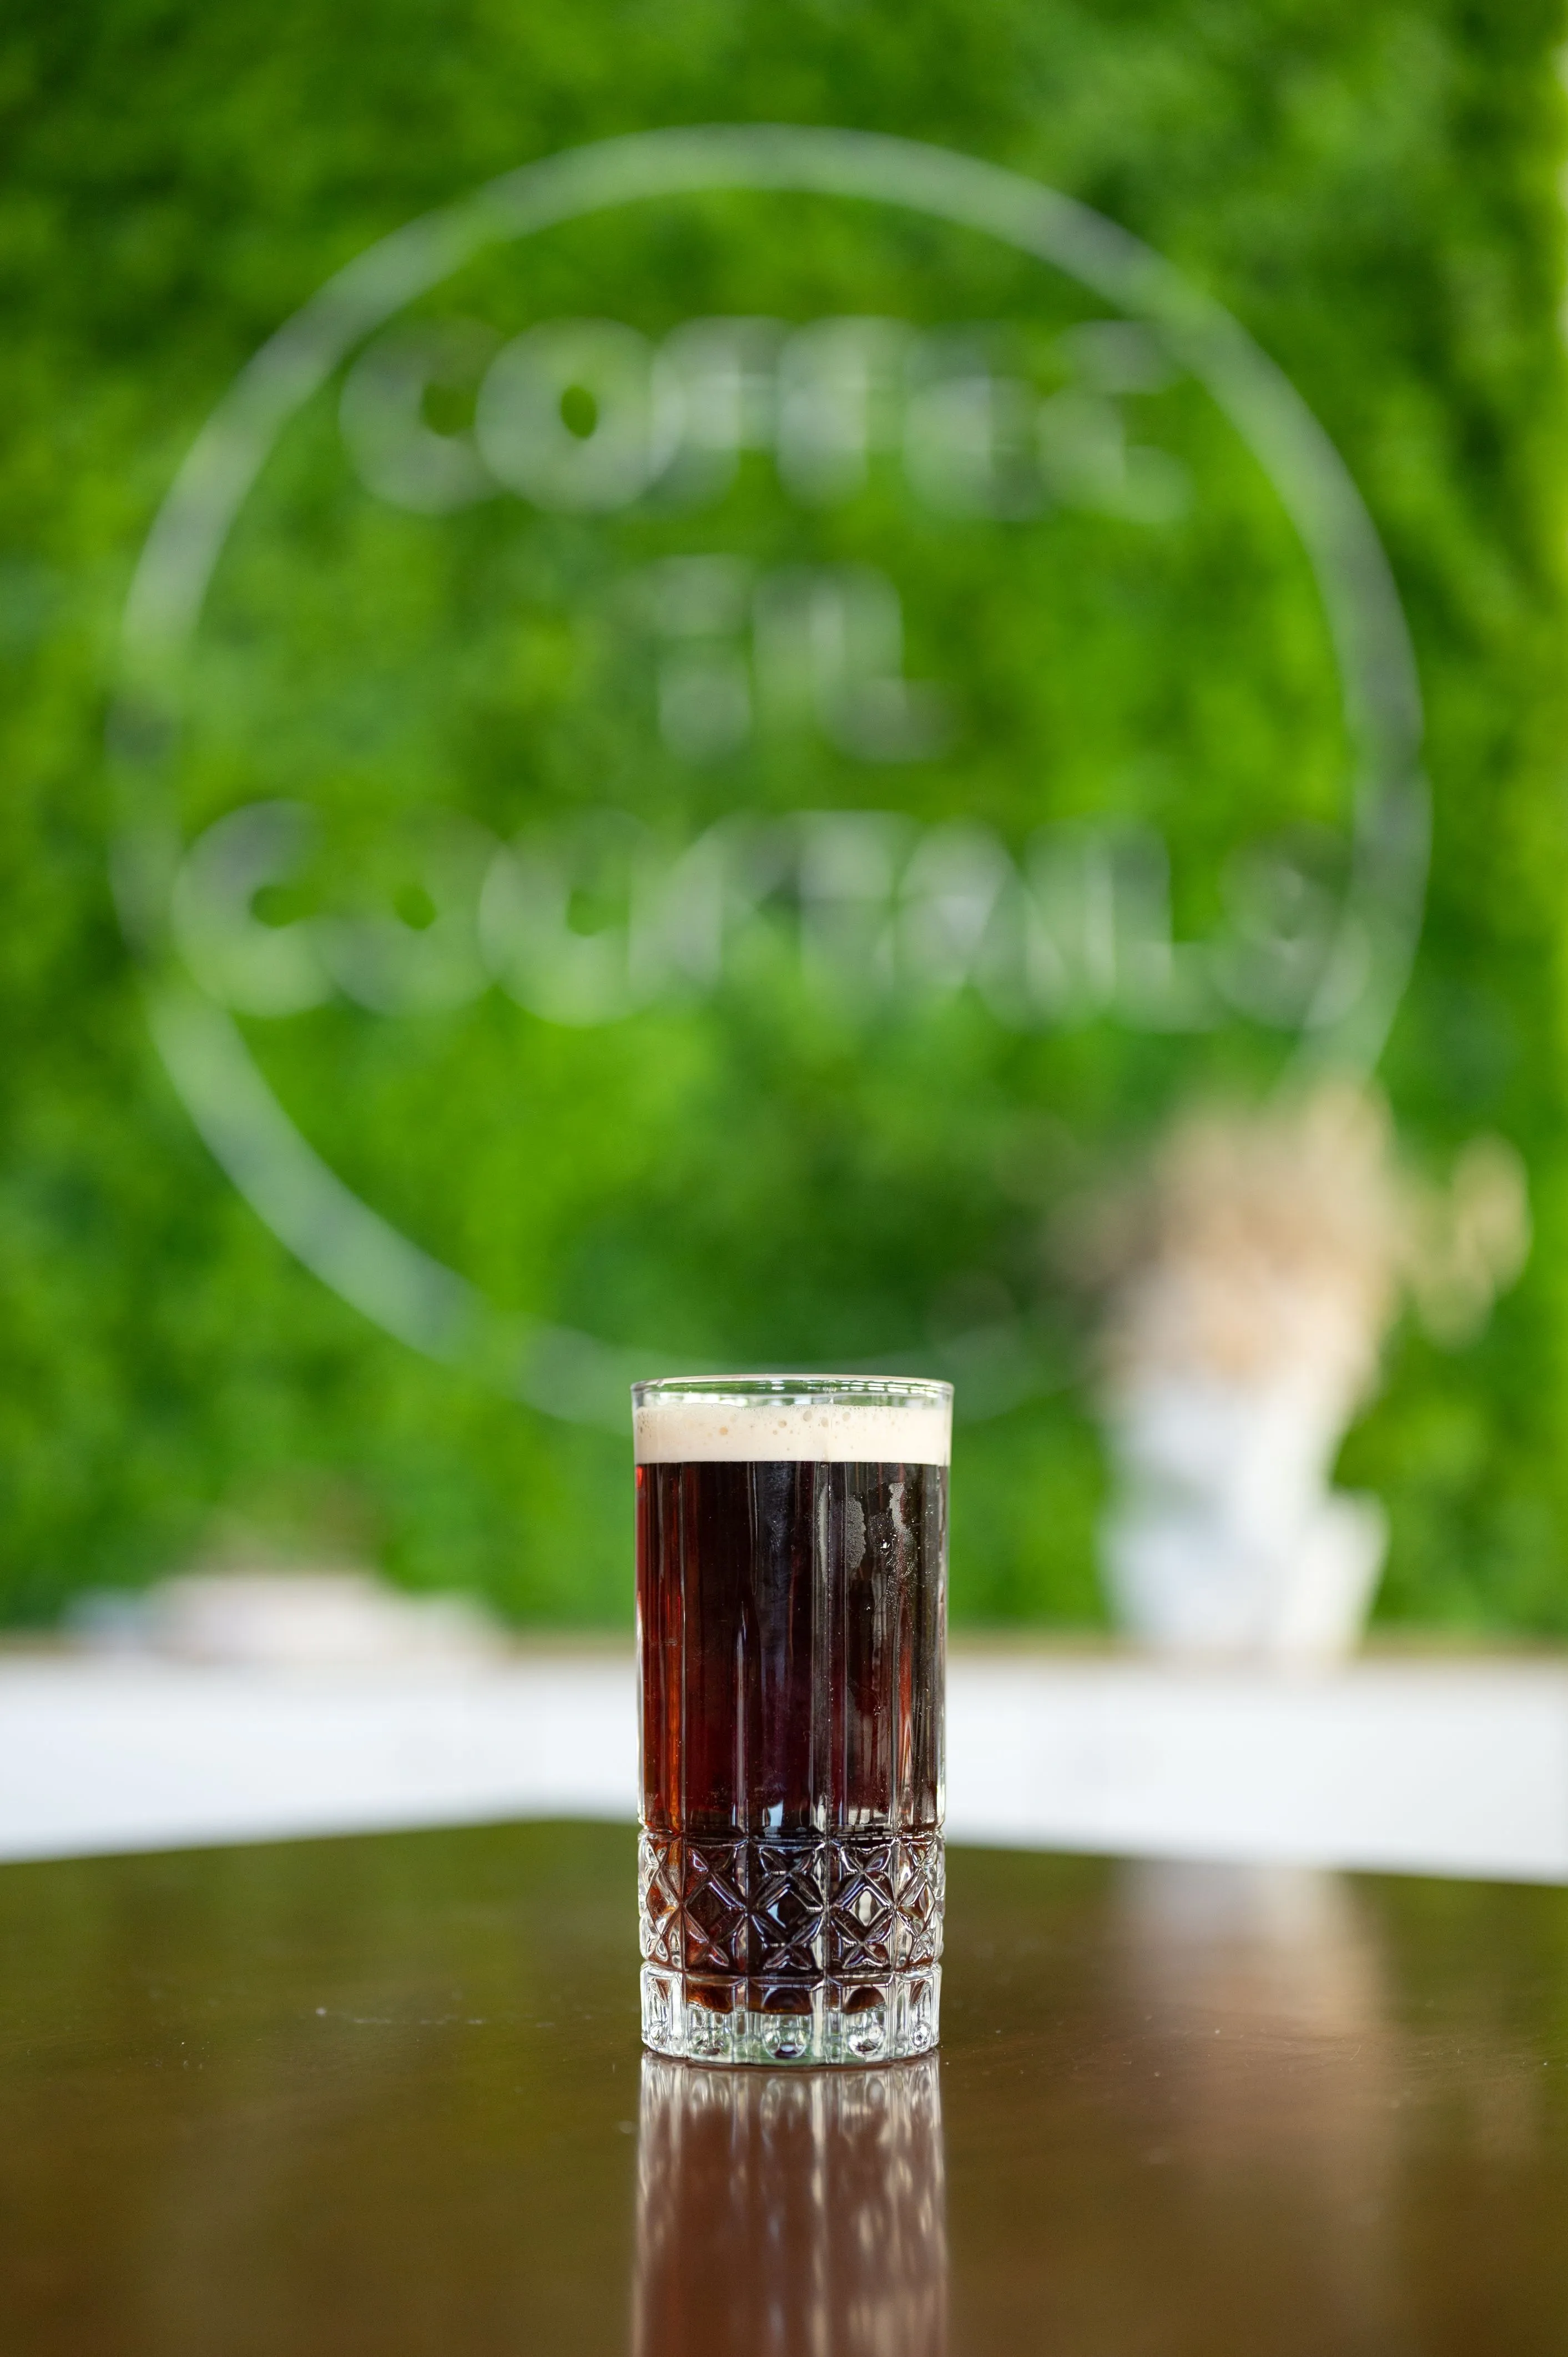 A glass of dark beer on a shiny table with an out-of-focus green background displaying the words "Coffee till Cocktails".